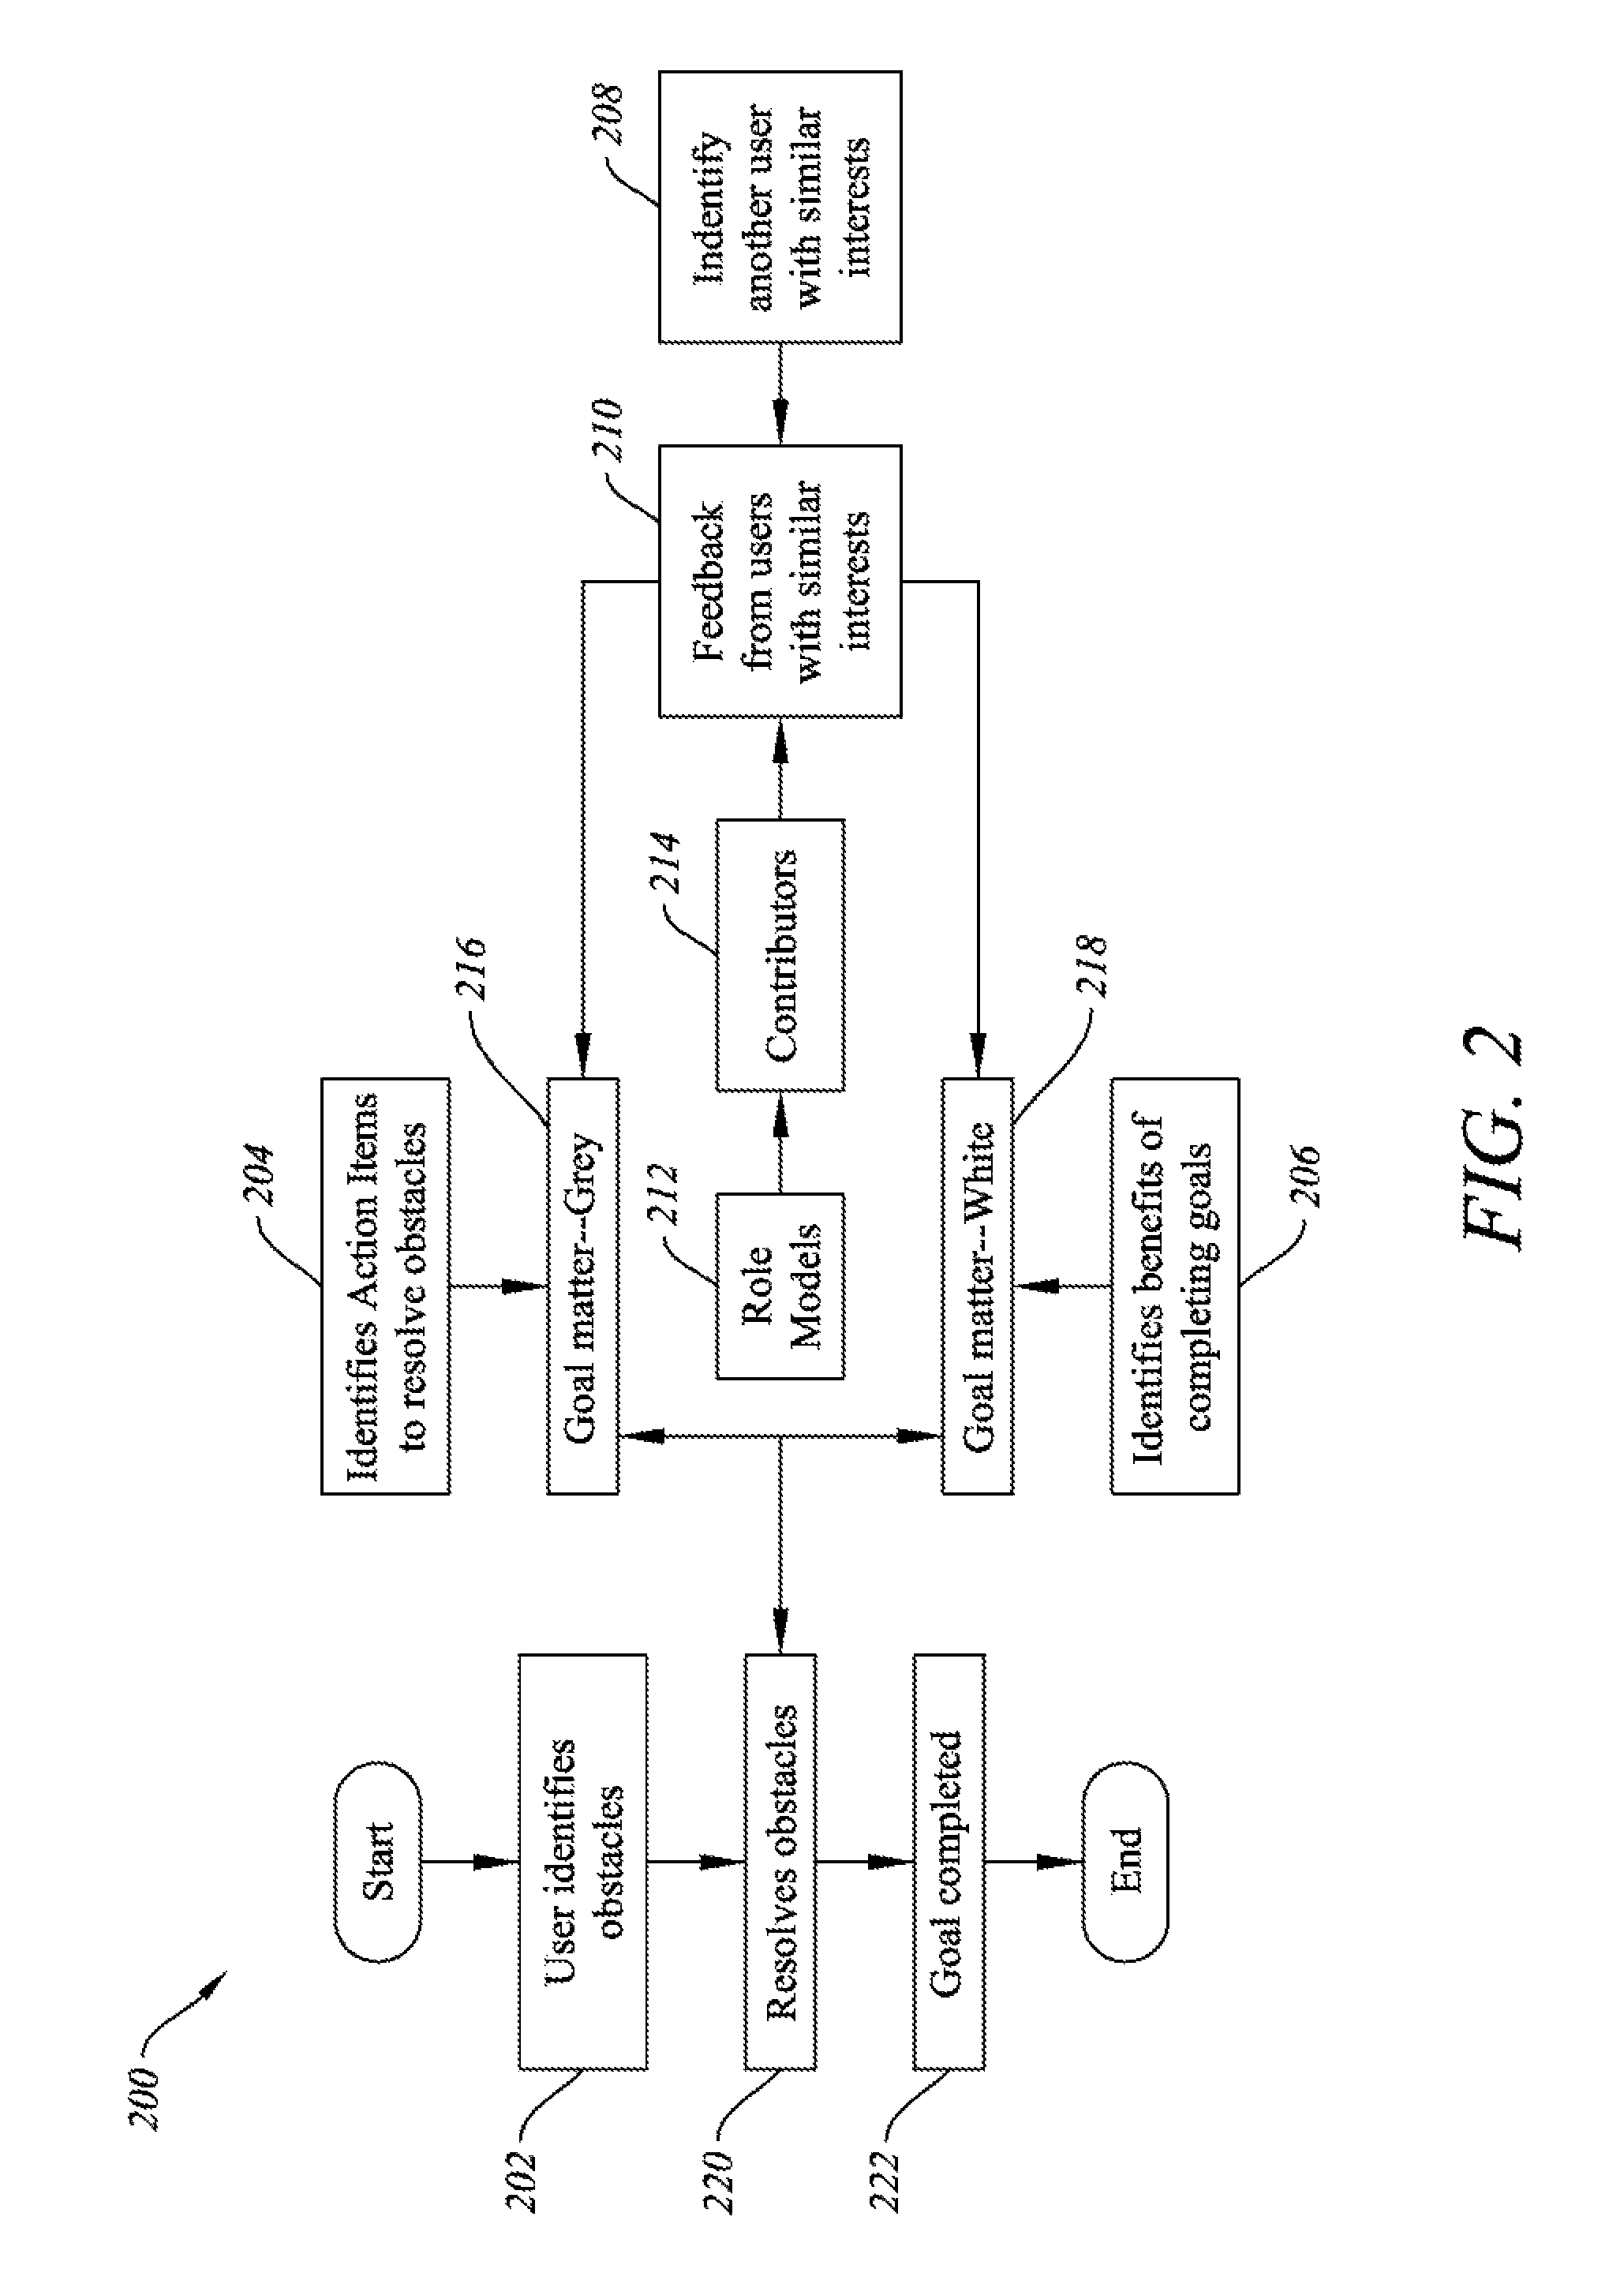 Method and system for a global goal based social networking